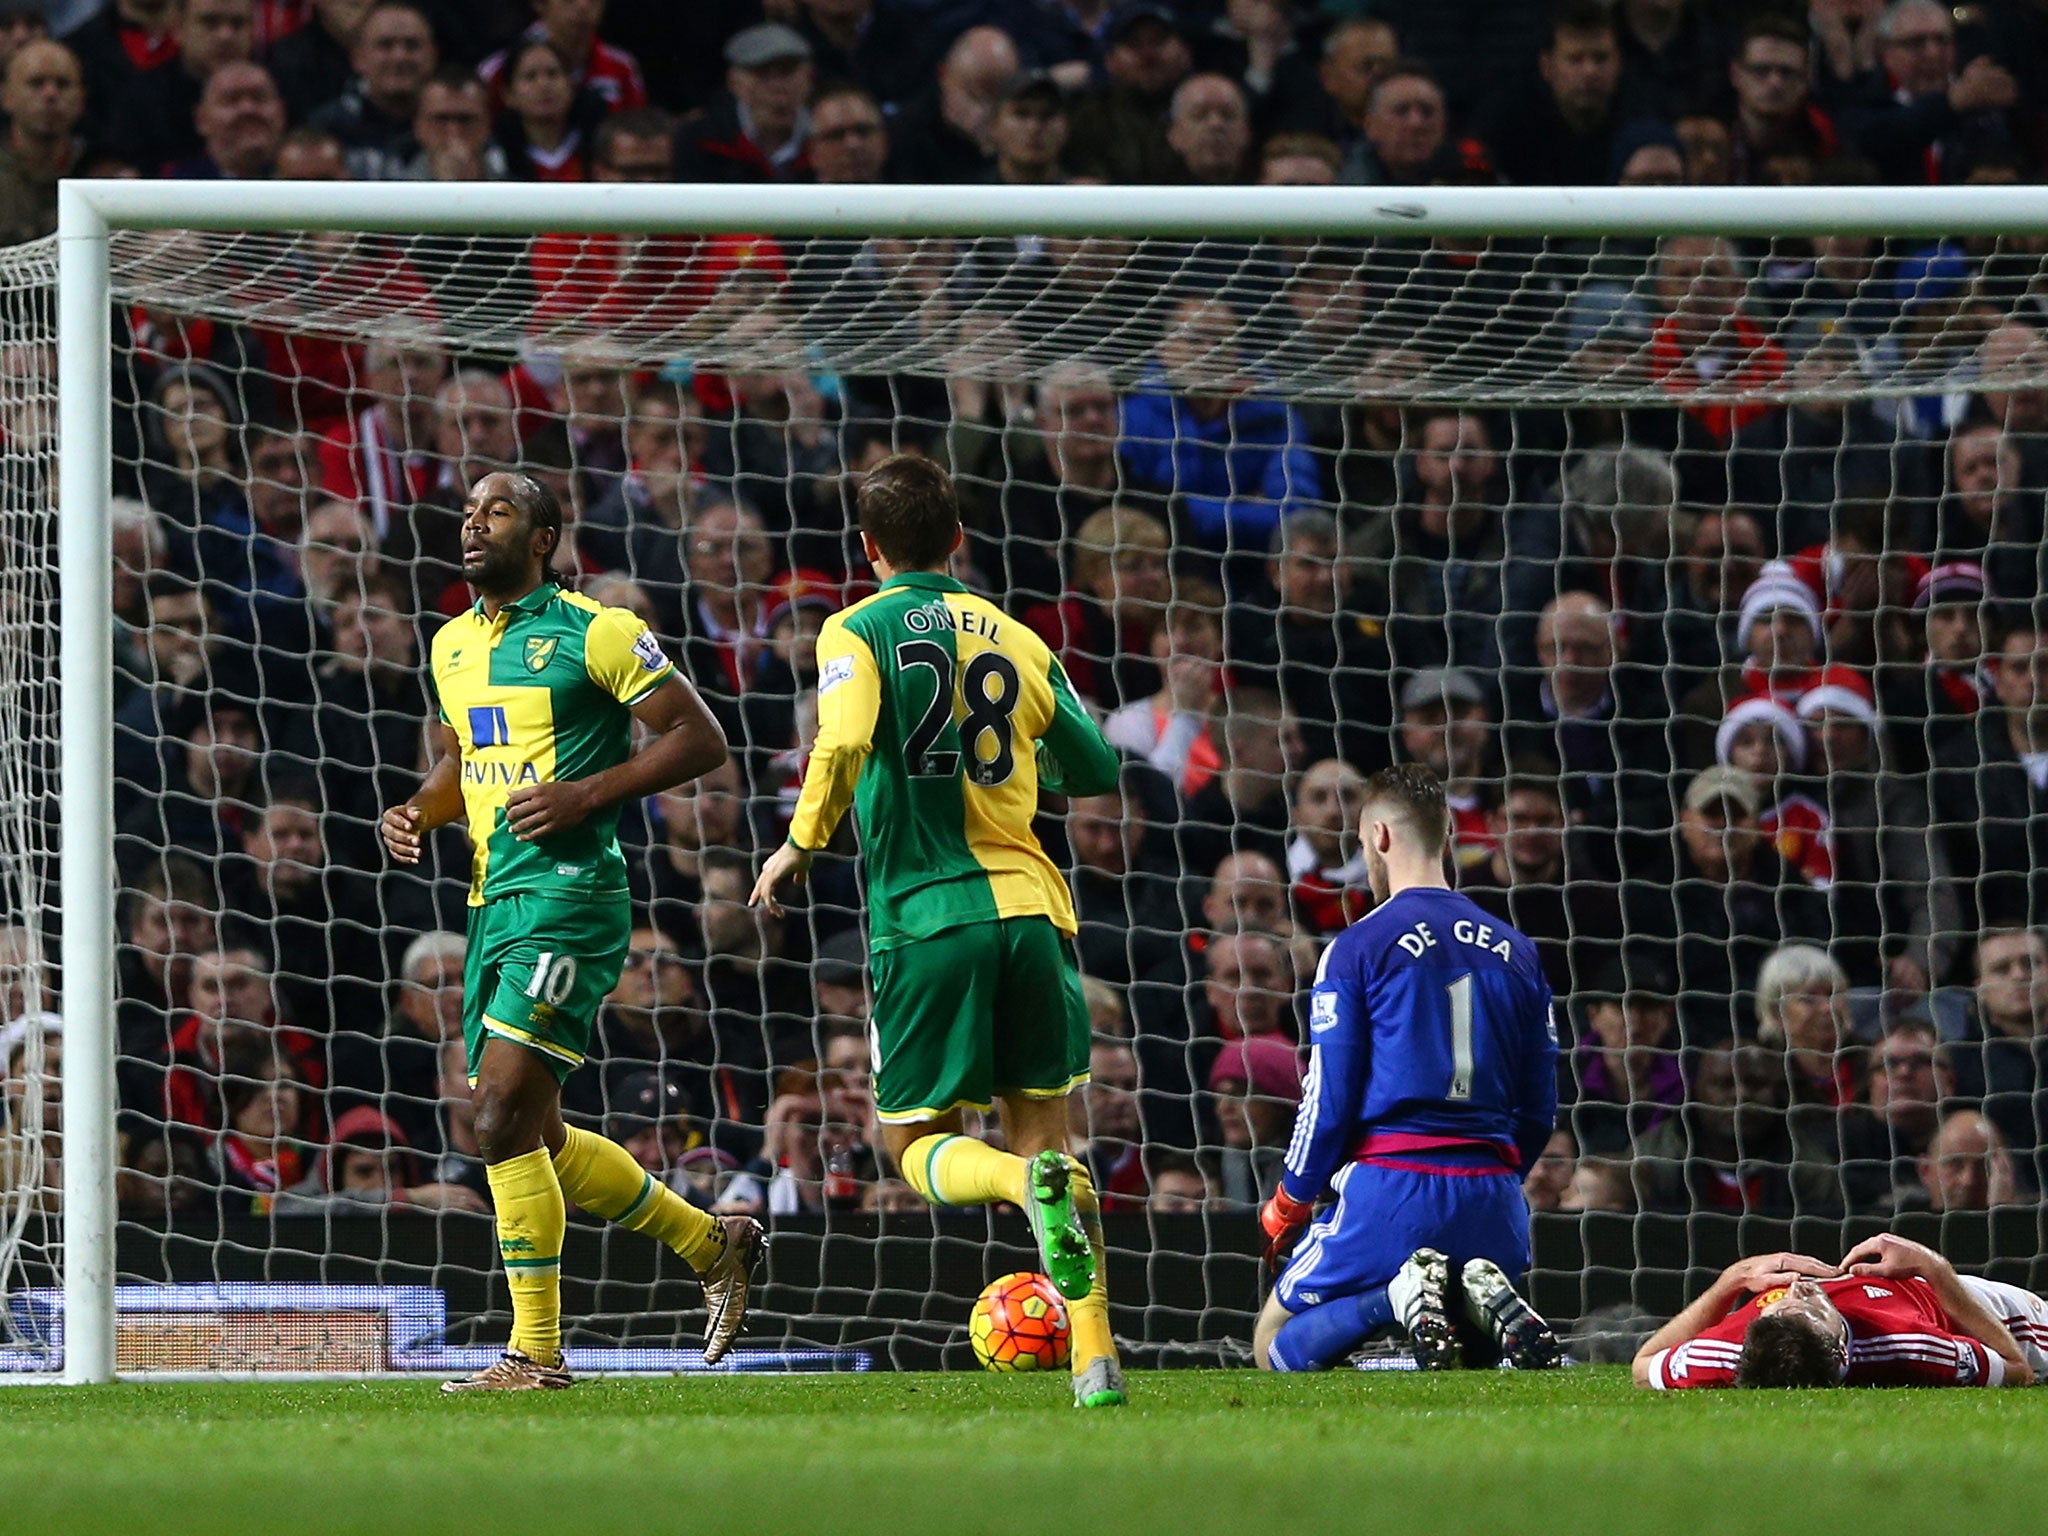 Cameron Jerome scores to put Norwich ahead against Manchester United